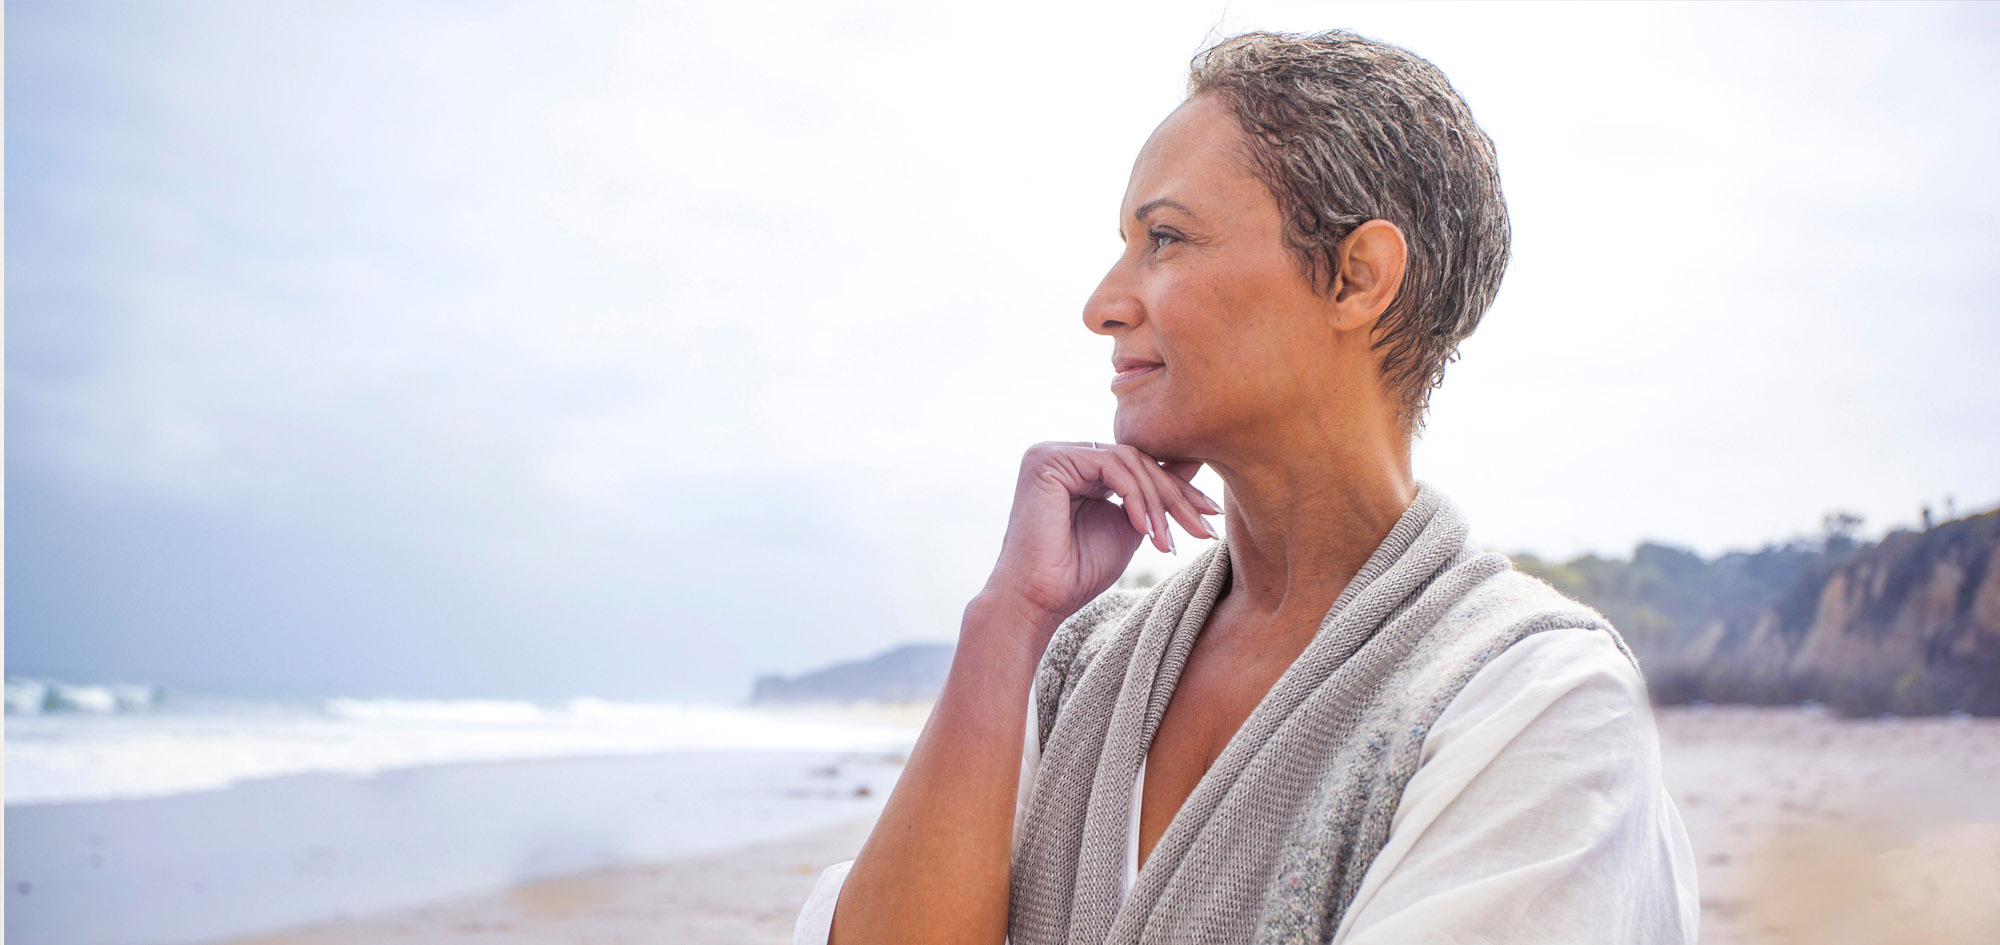 Middle-aged woman looking at ocean